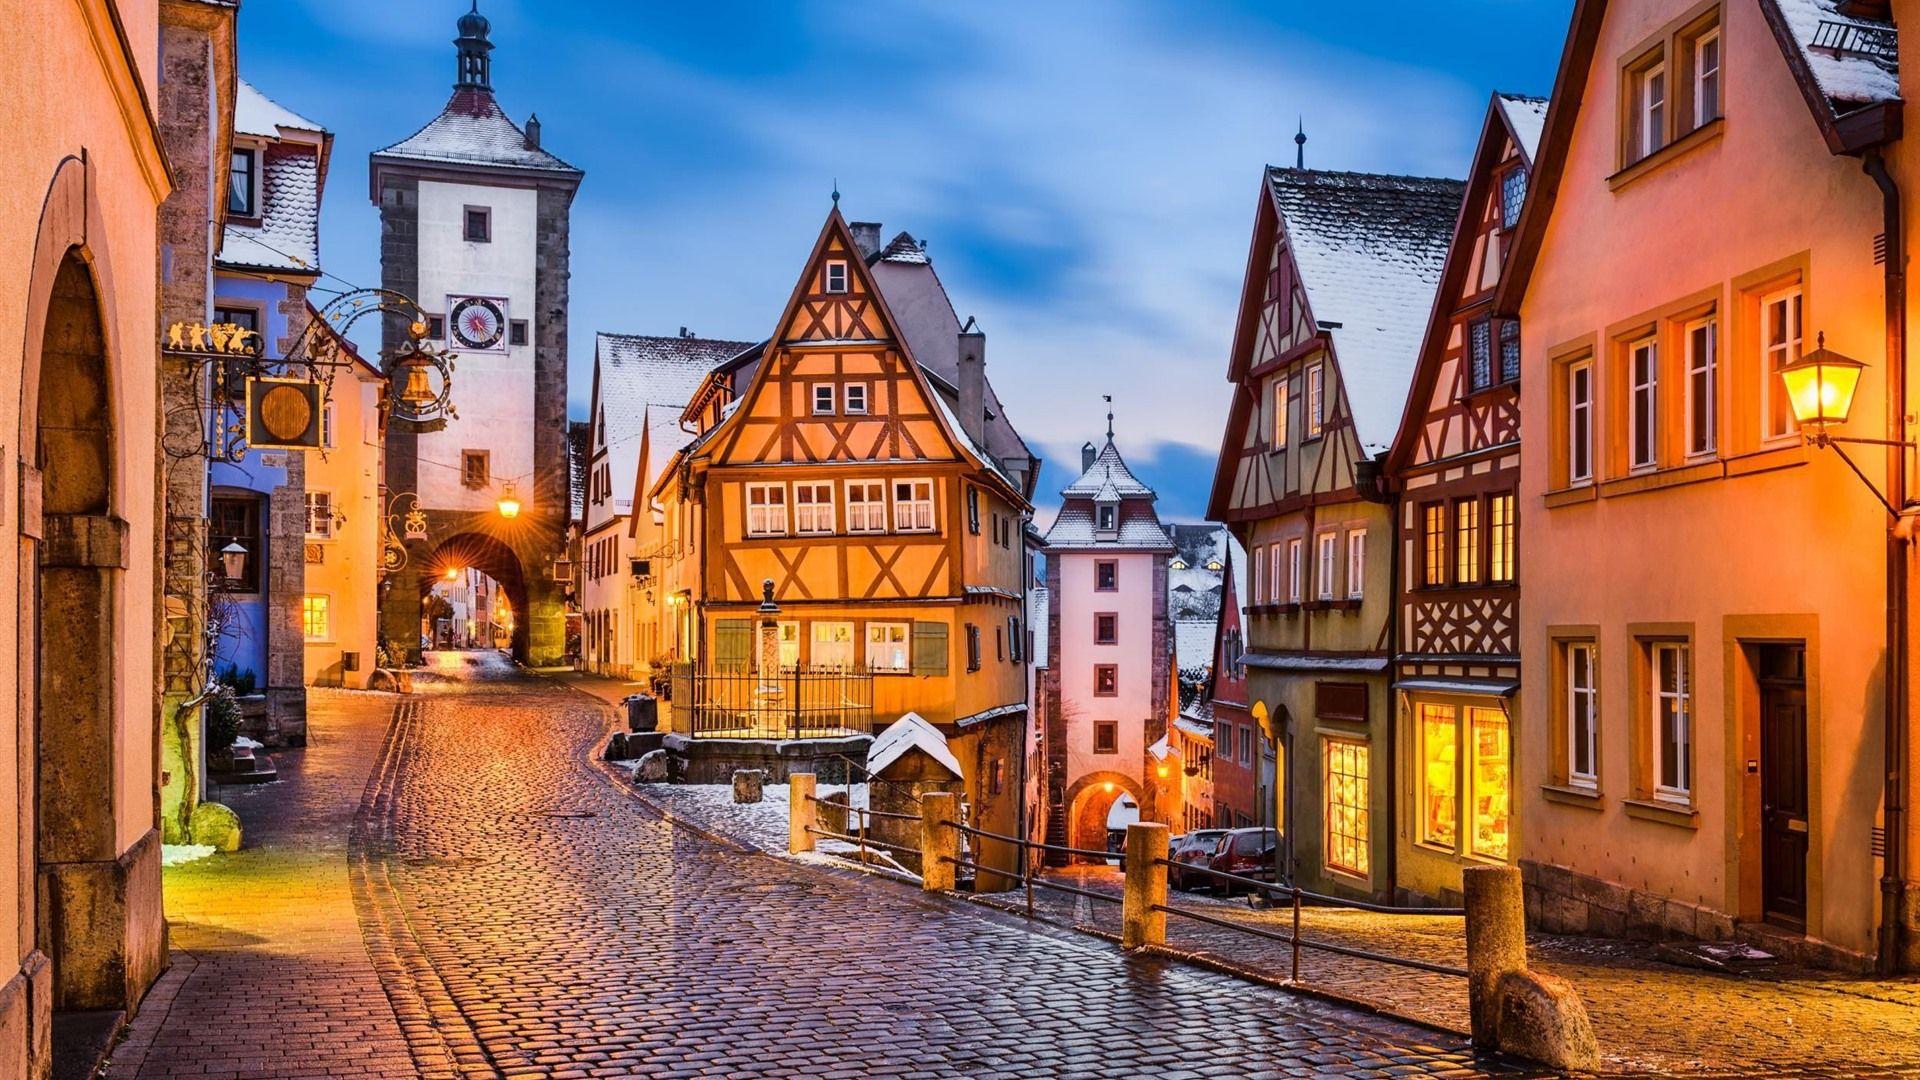 Medieval Town Wallpapers - Top Free Medieval Town Backgrounds